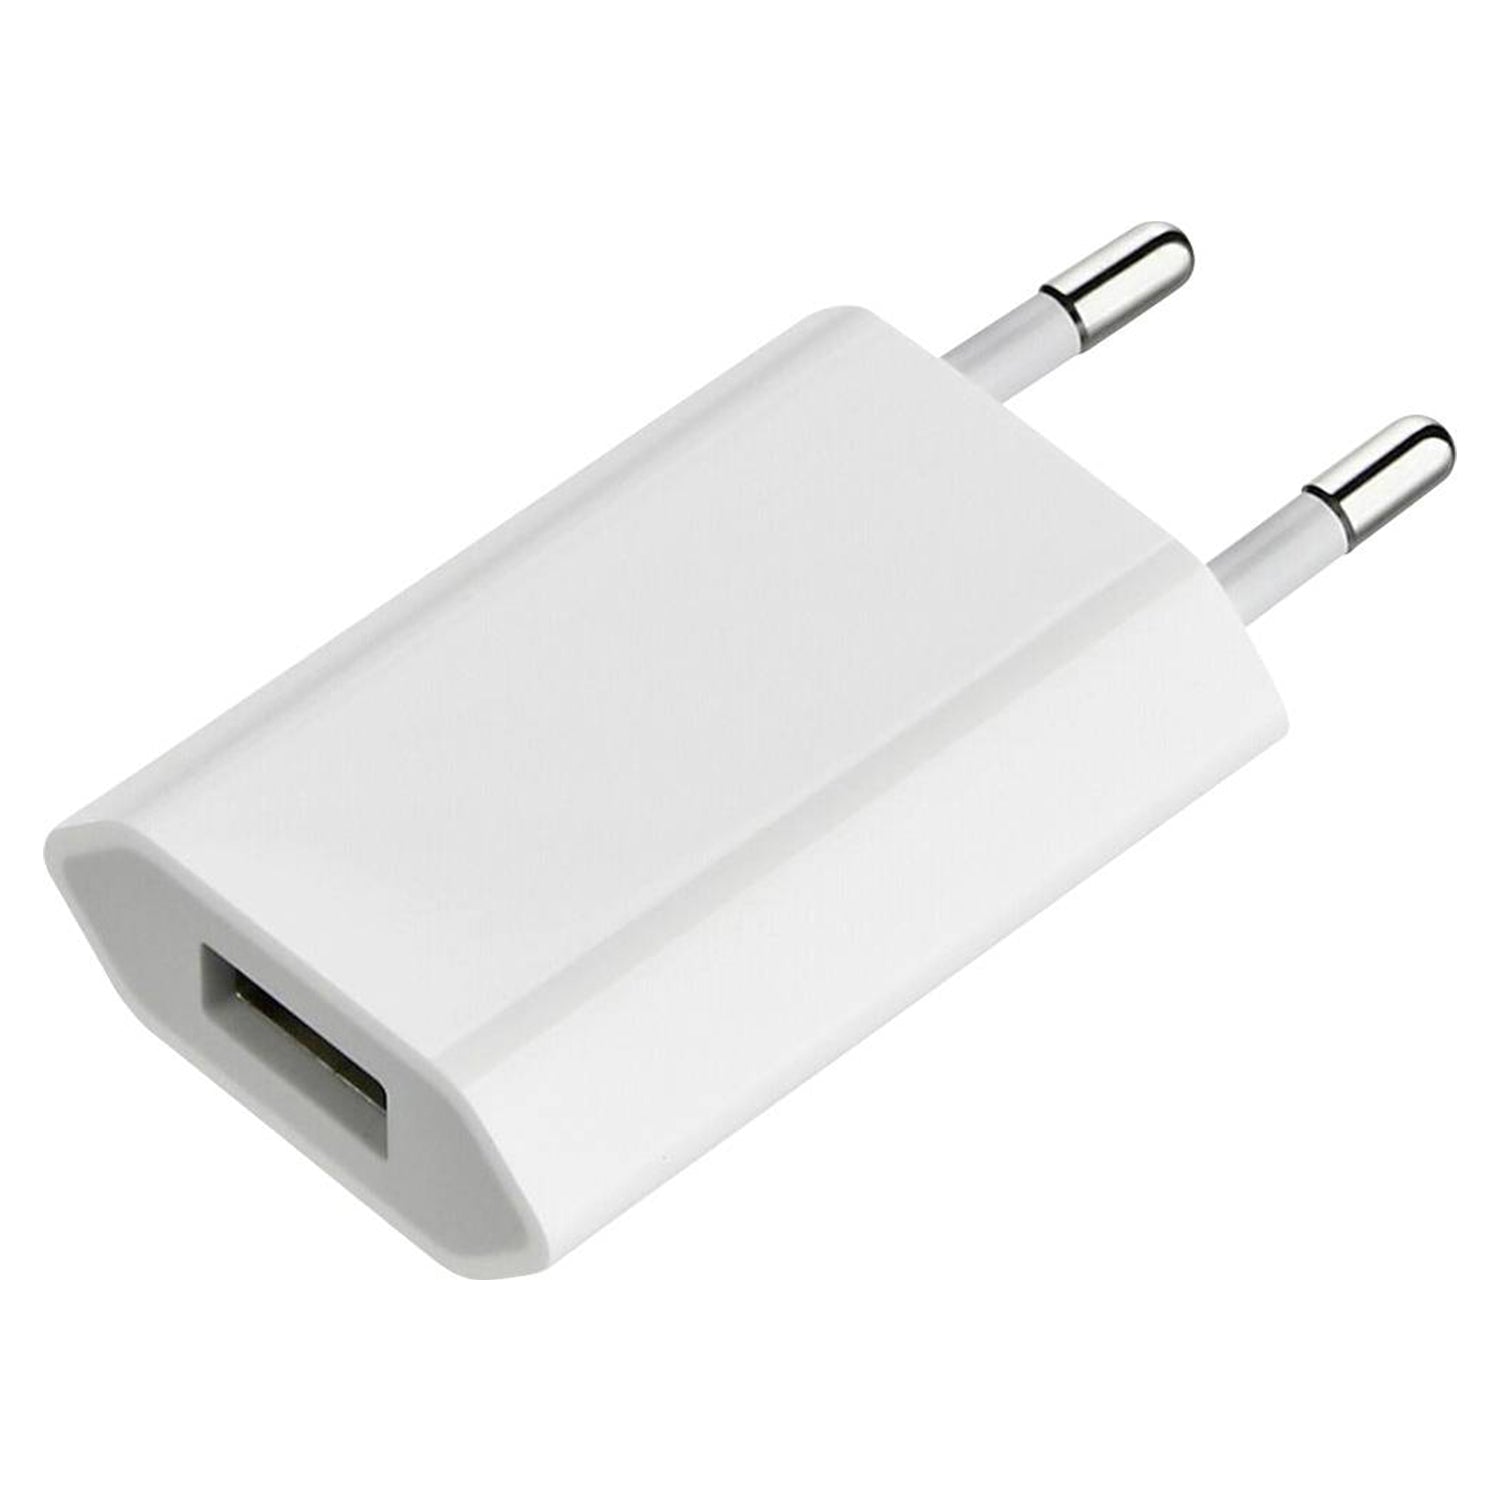 7425 USB Wall Charger for All iPhone, Android, Smart Phones (Adaptor Only)